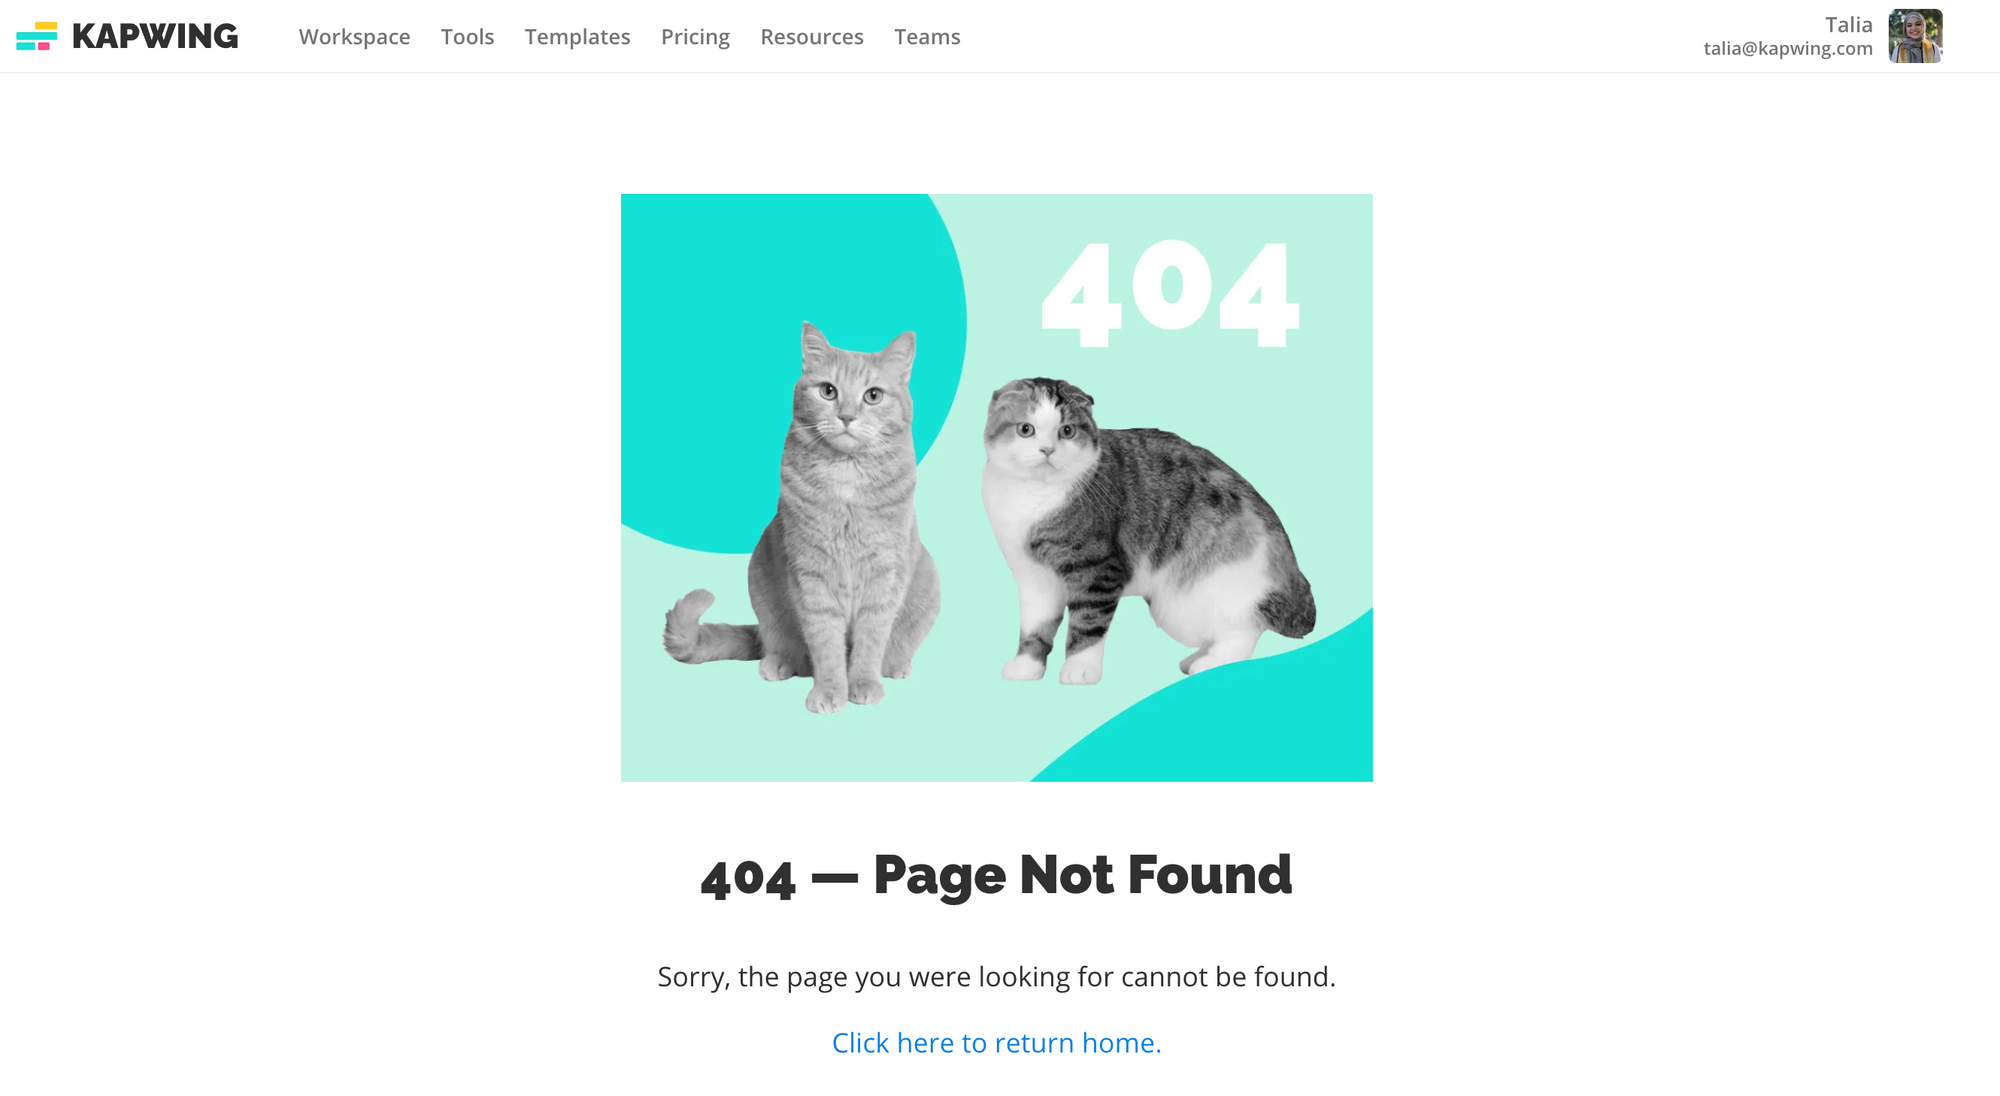 A screenshot of a 404 error - page not found page with additional text, a link to return home, and a graphic of two real cats instead of our cartoon mascots